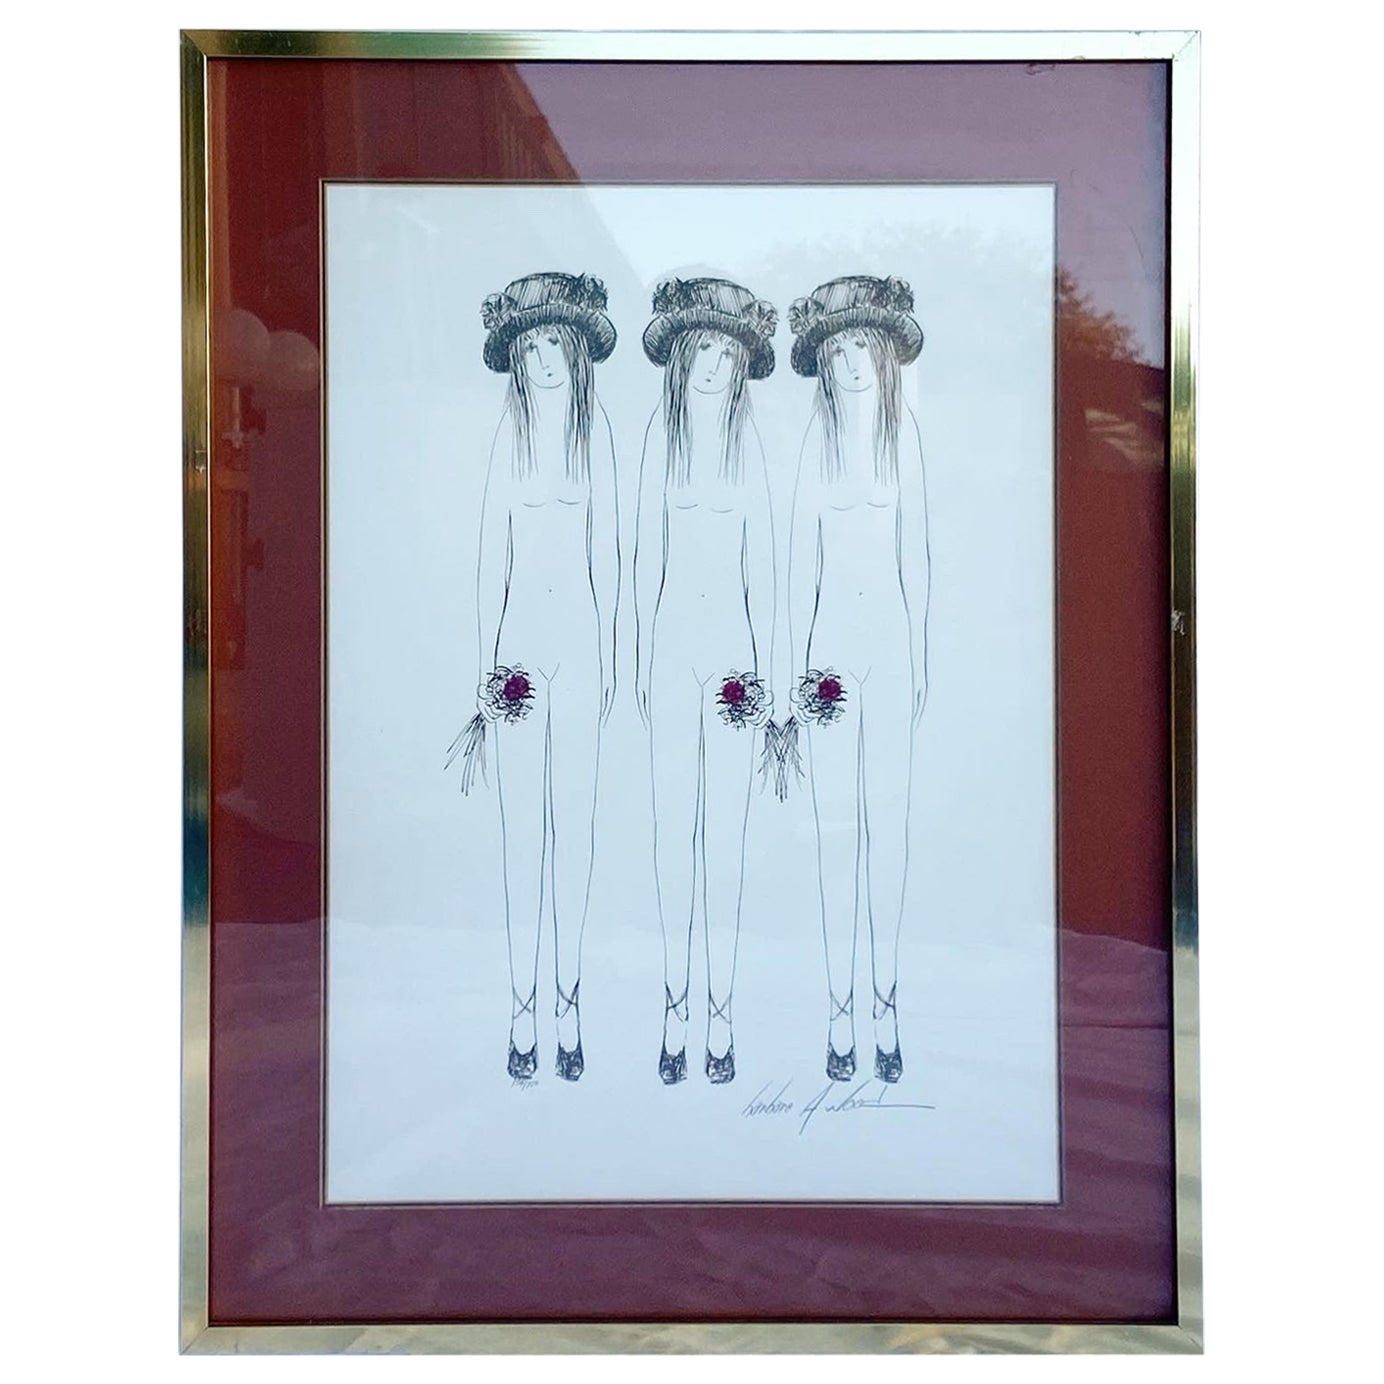 Three Sisters, Framed and Signed Lithograph 153/750 by Barbara A. Wood